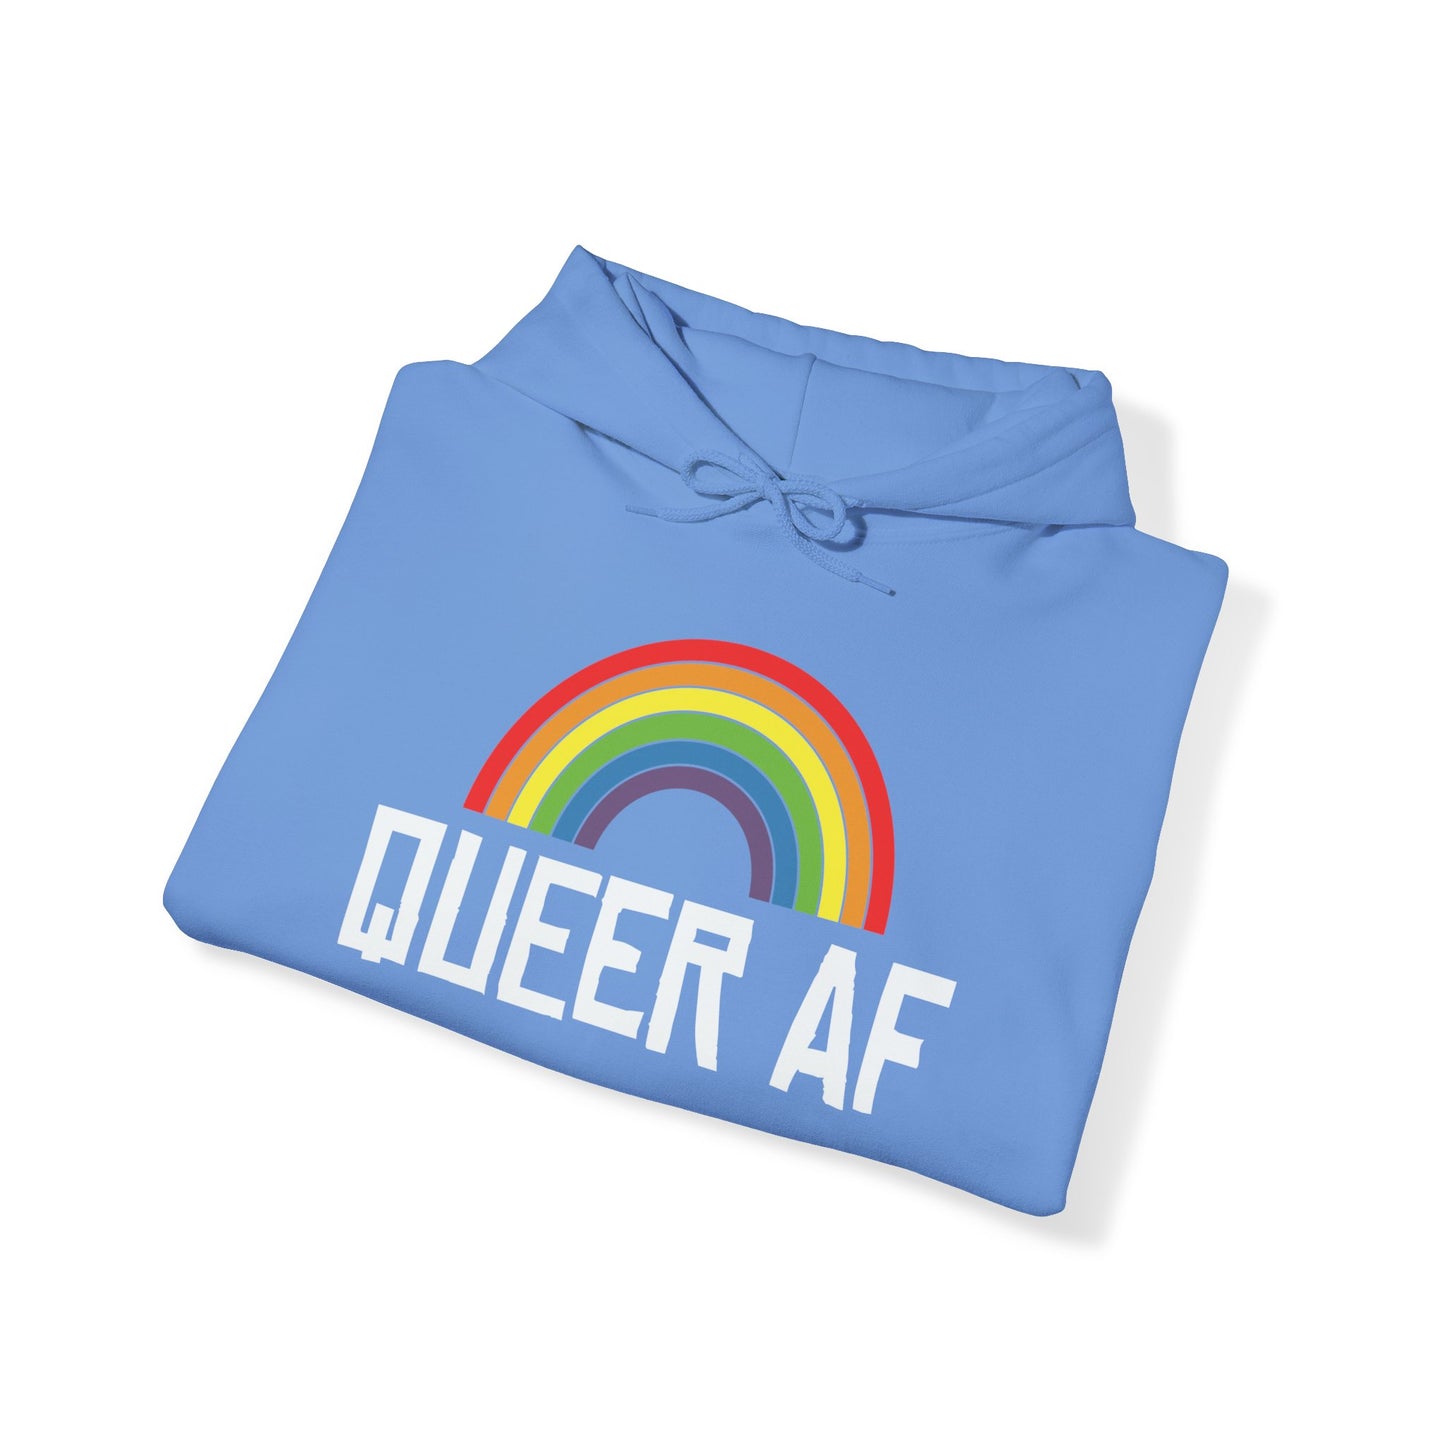 Queer as Fuck